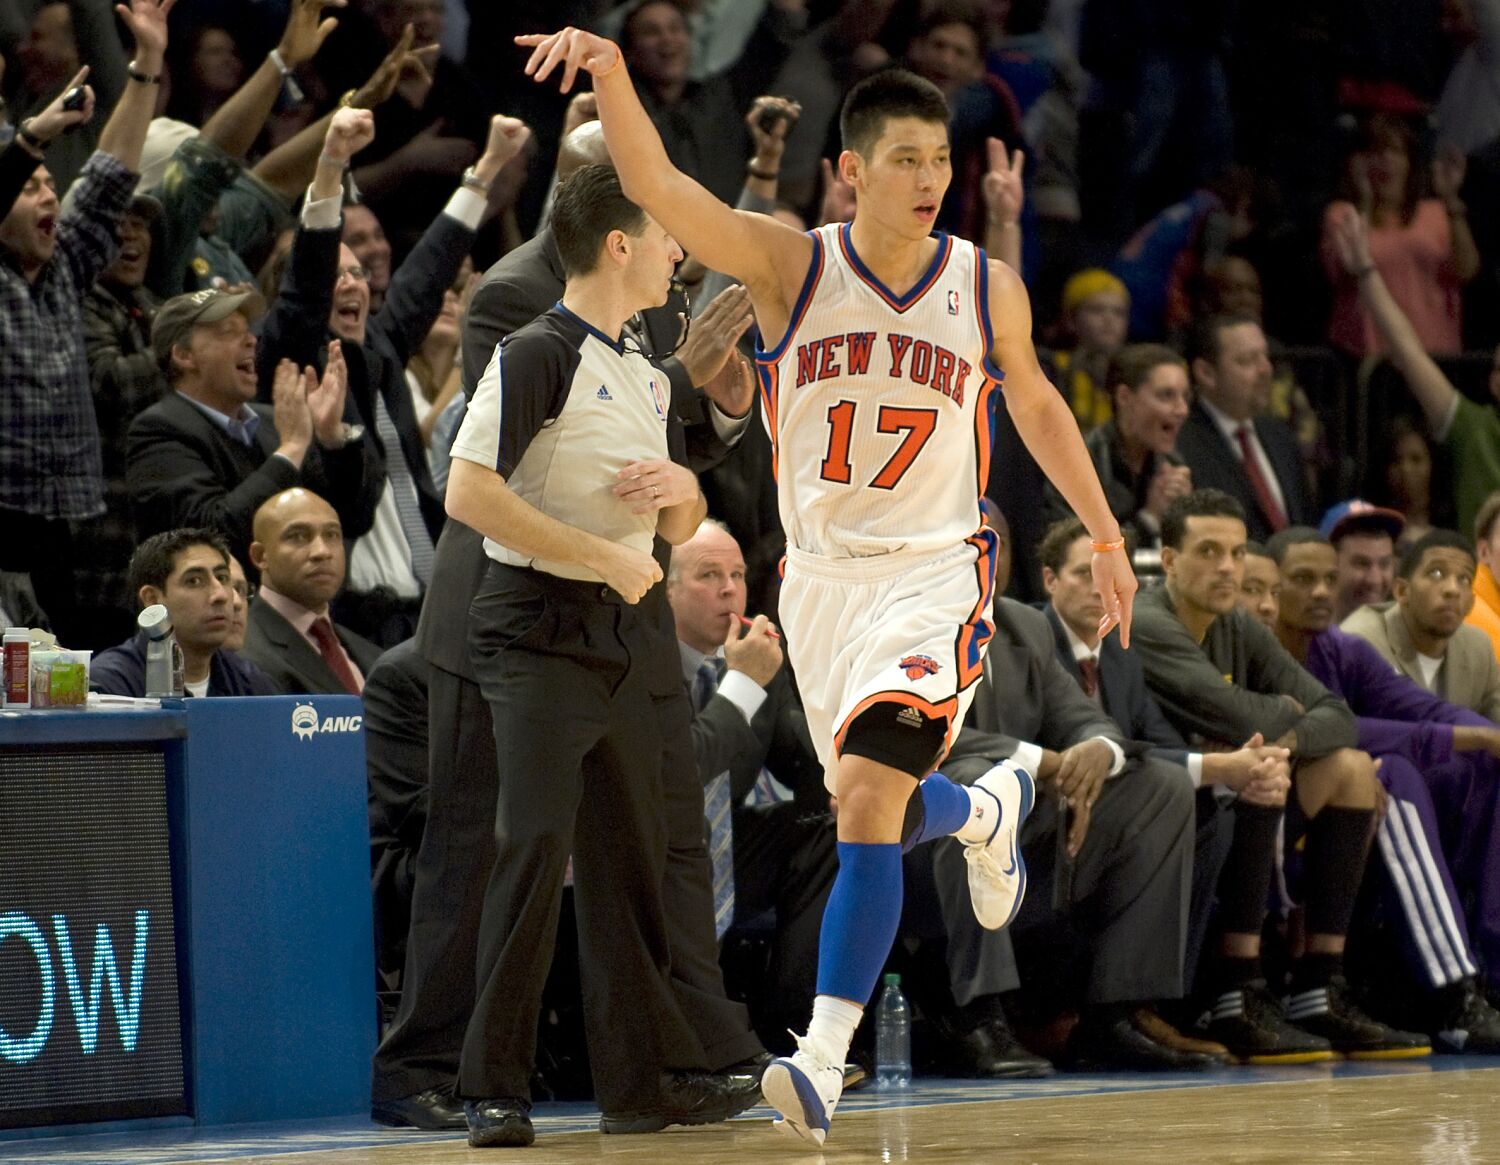 Jeremy Lin doc '38 at the Garden' moves Linsanity beyond basketball